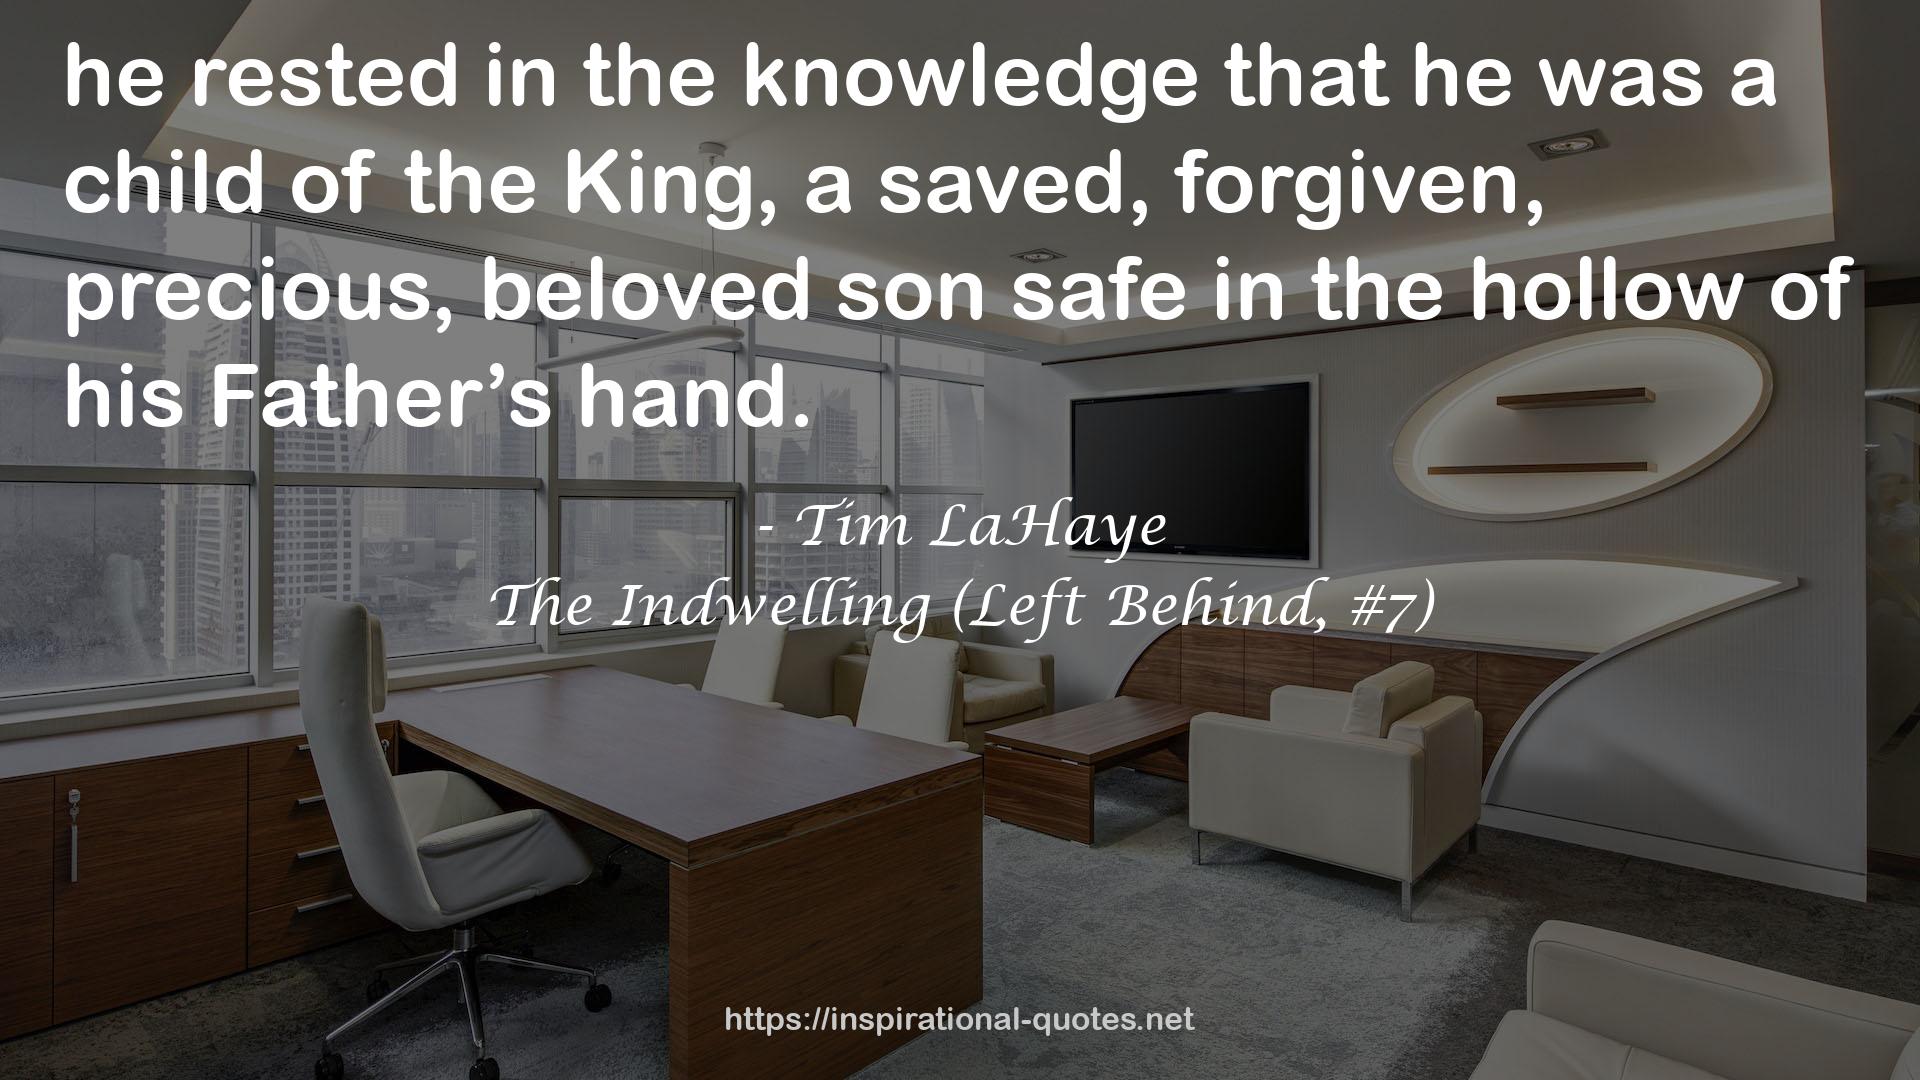 The Indwelling (Left Behind, #7) QUOTES